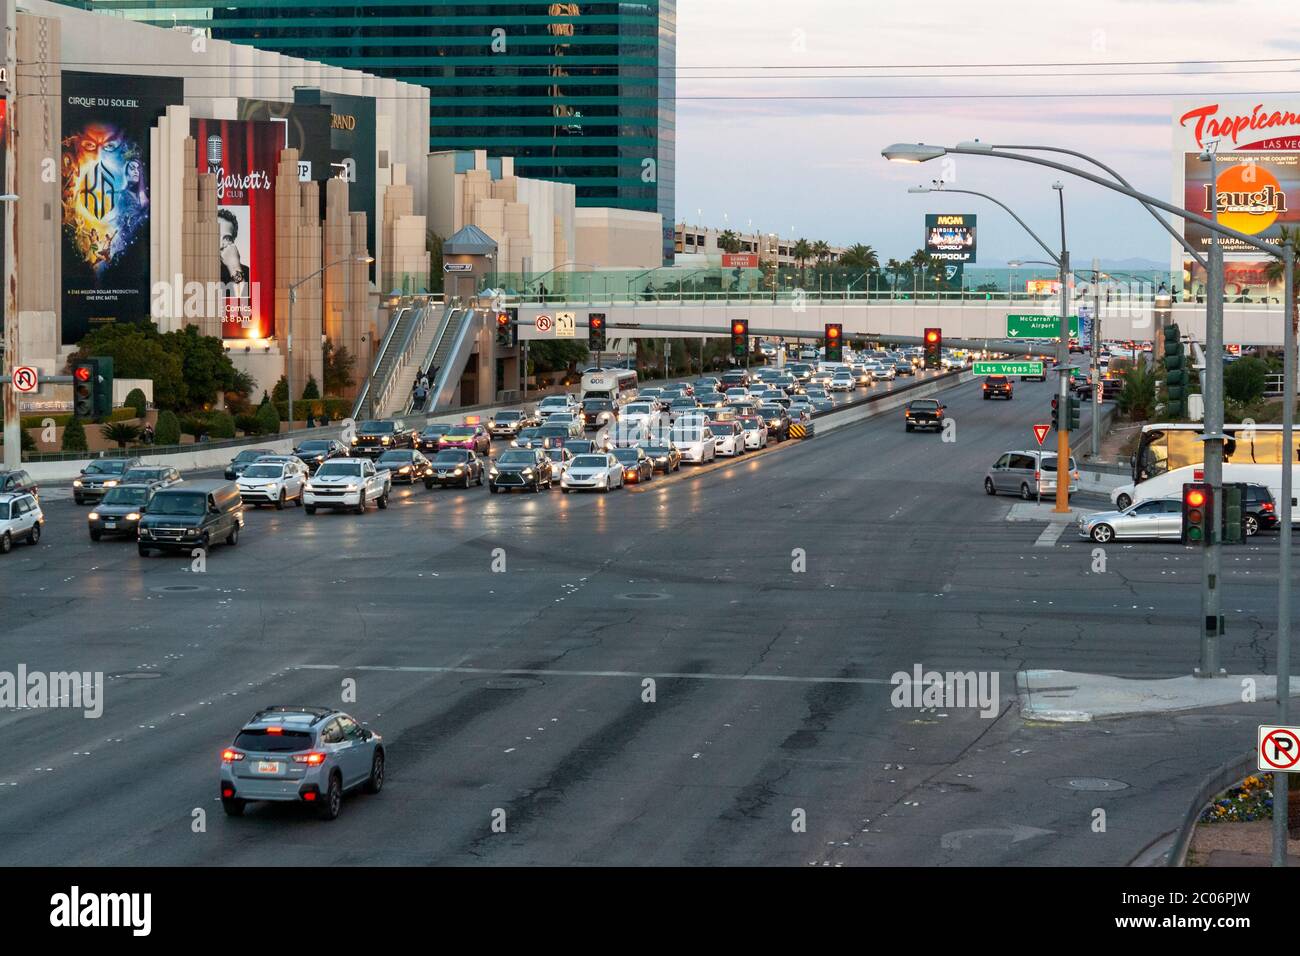 Las Vegas, Nevada  / USA - February 27, 2019: Afternoon traffic at the intersection of Tropicana Ave and S.Las Vegas Blvd on the Las Vegas Strip. Stock Photo